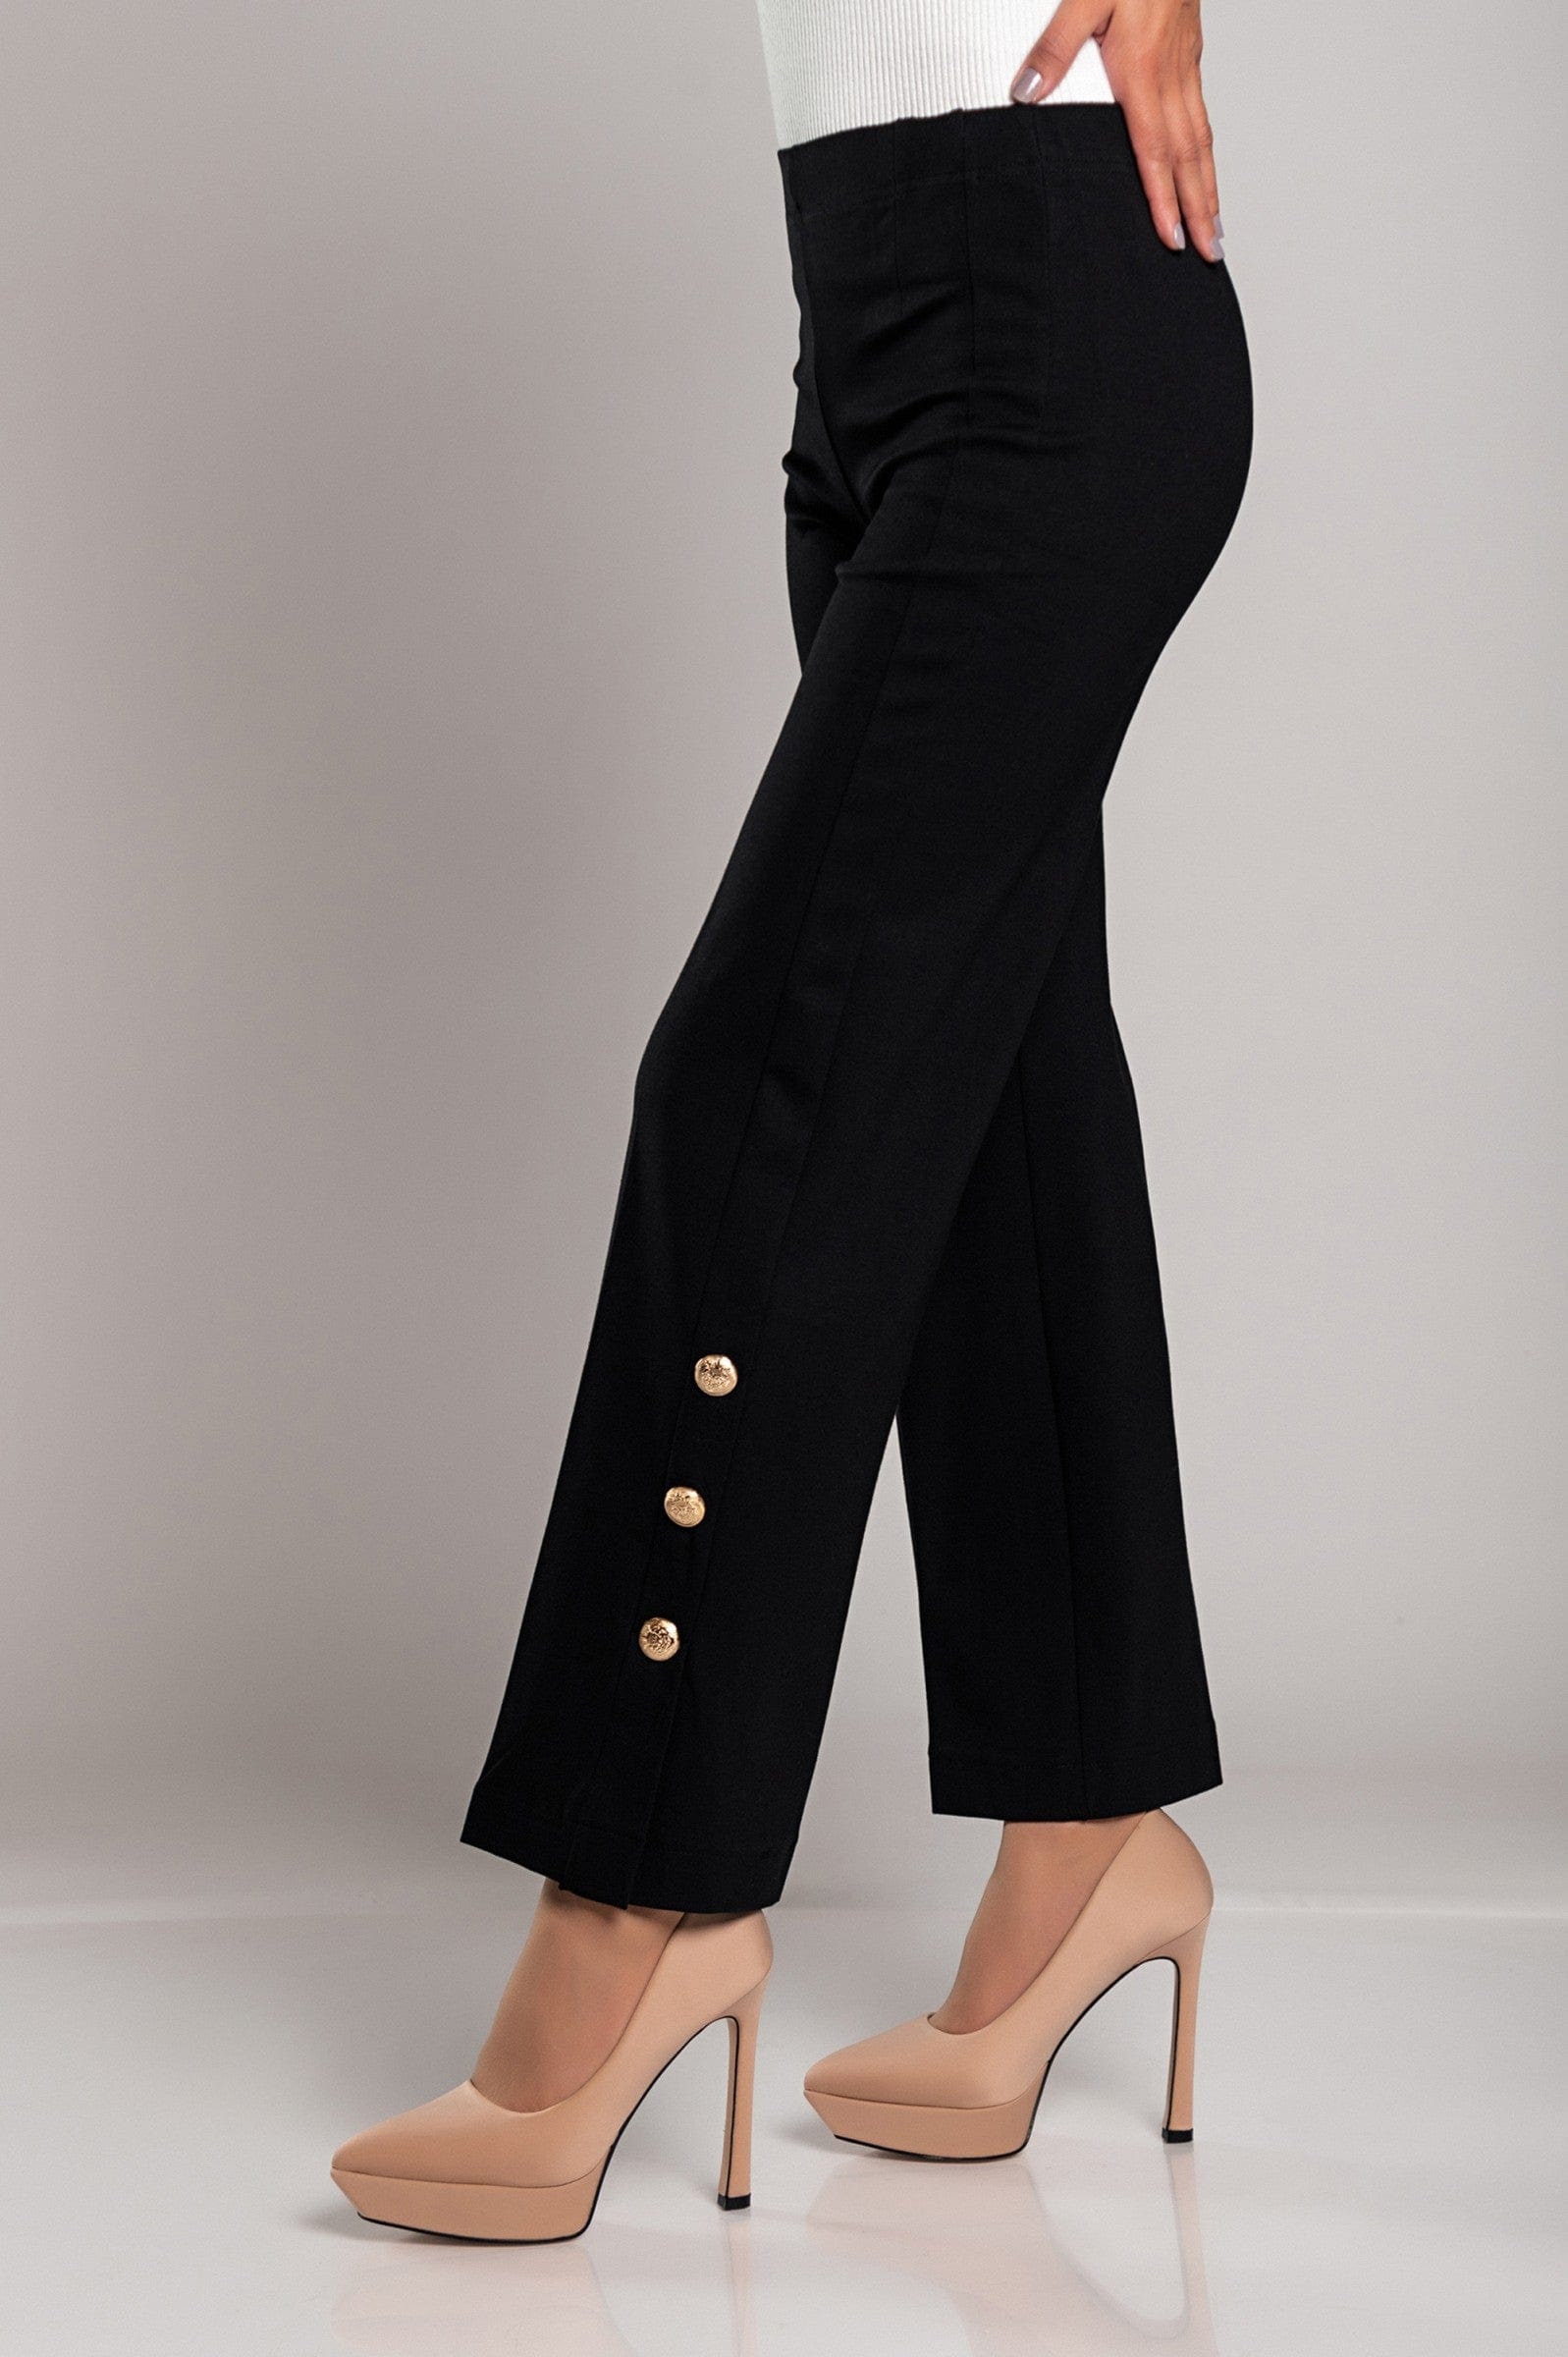 Scarlet Chaos Women's Trousers Elegant Trousers with buttons, Black